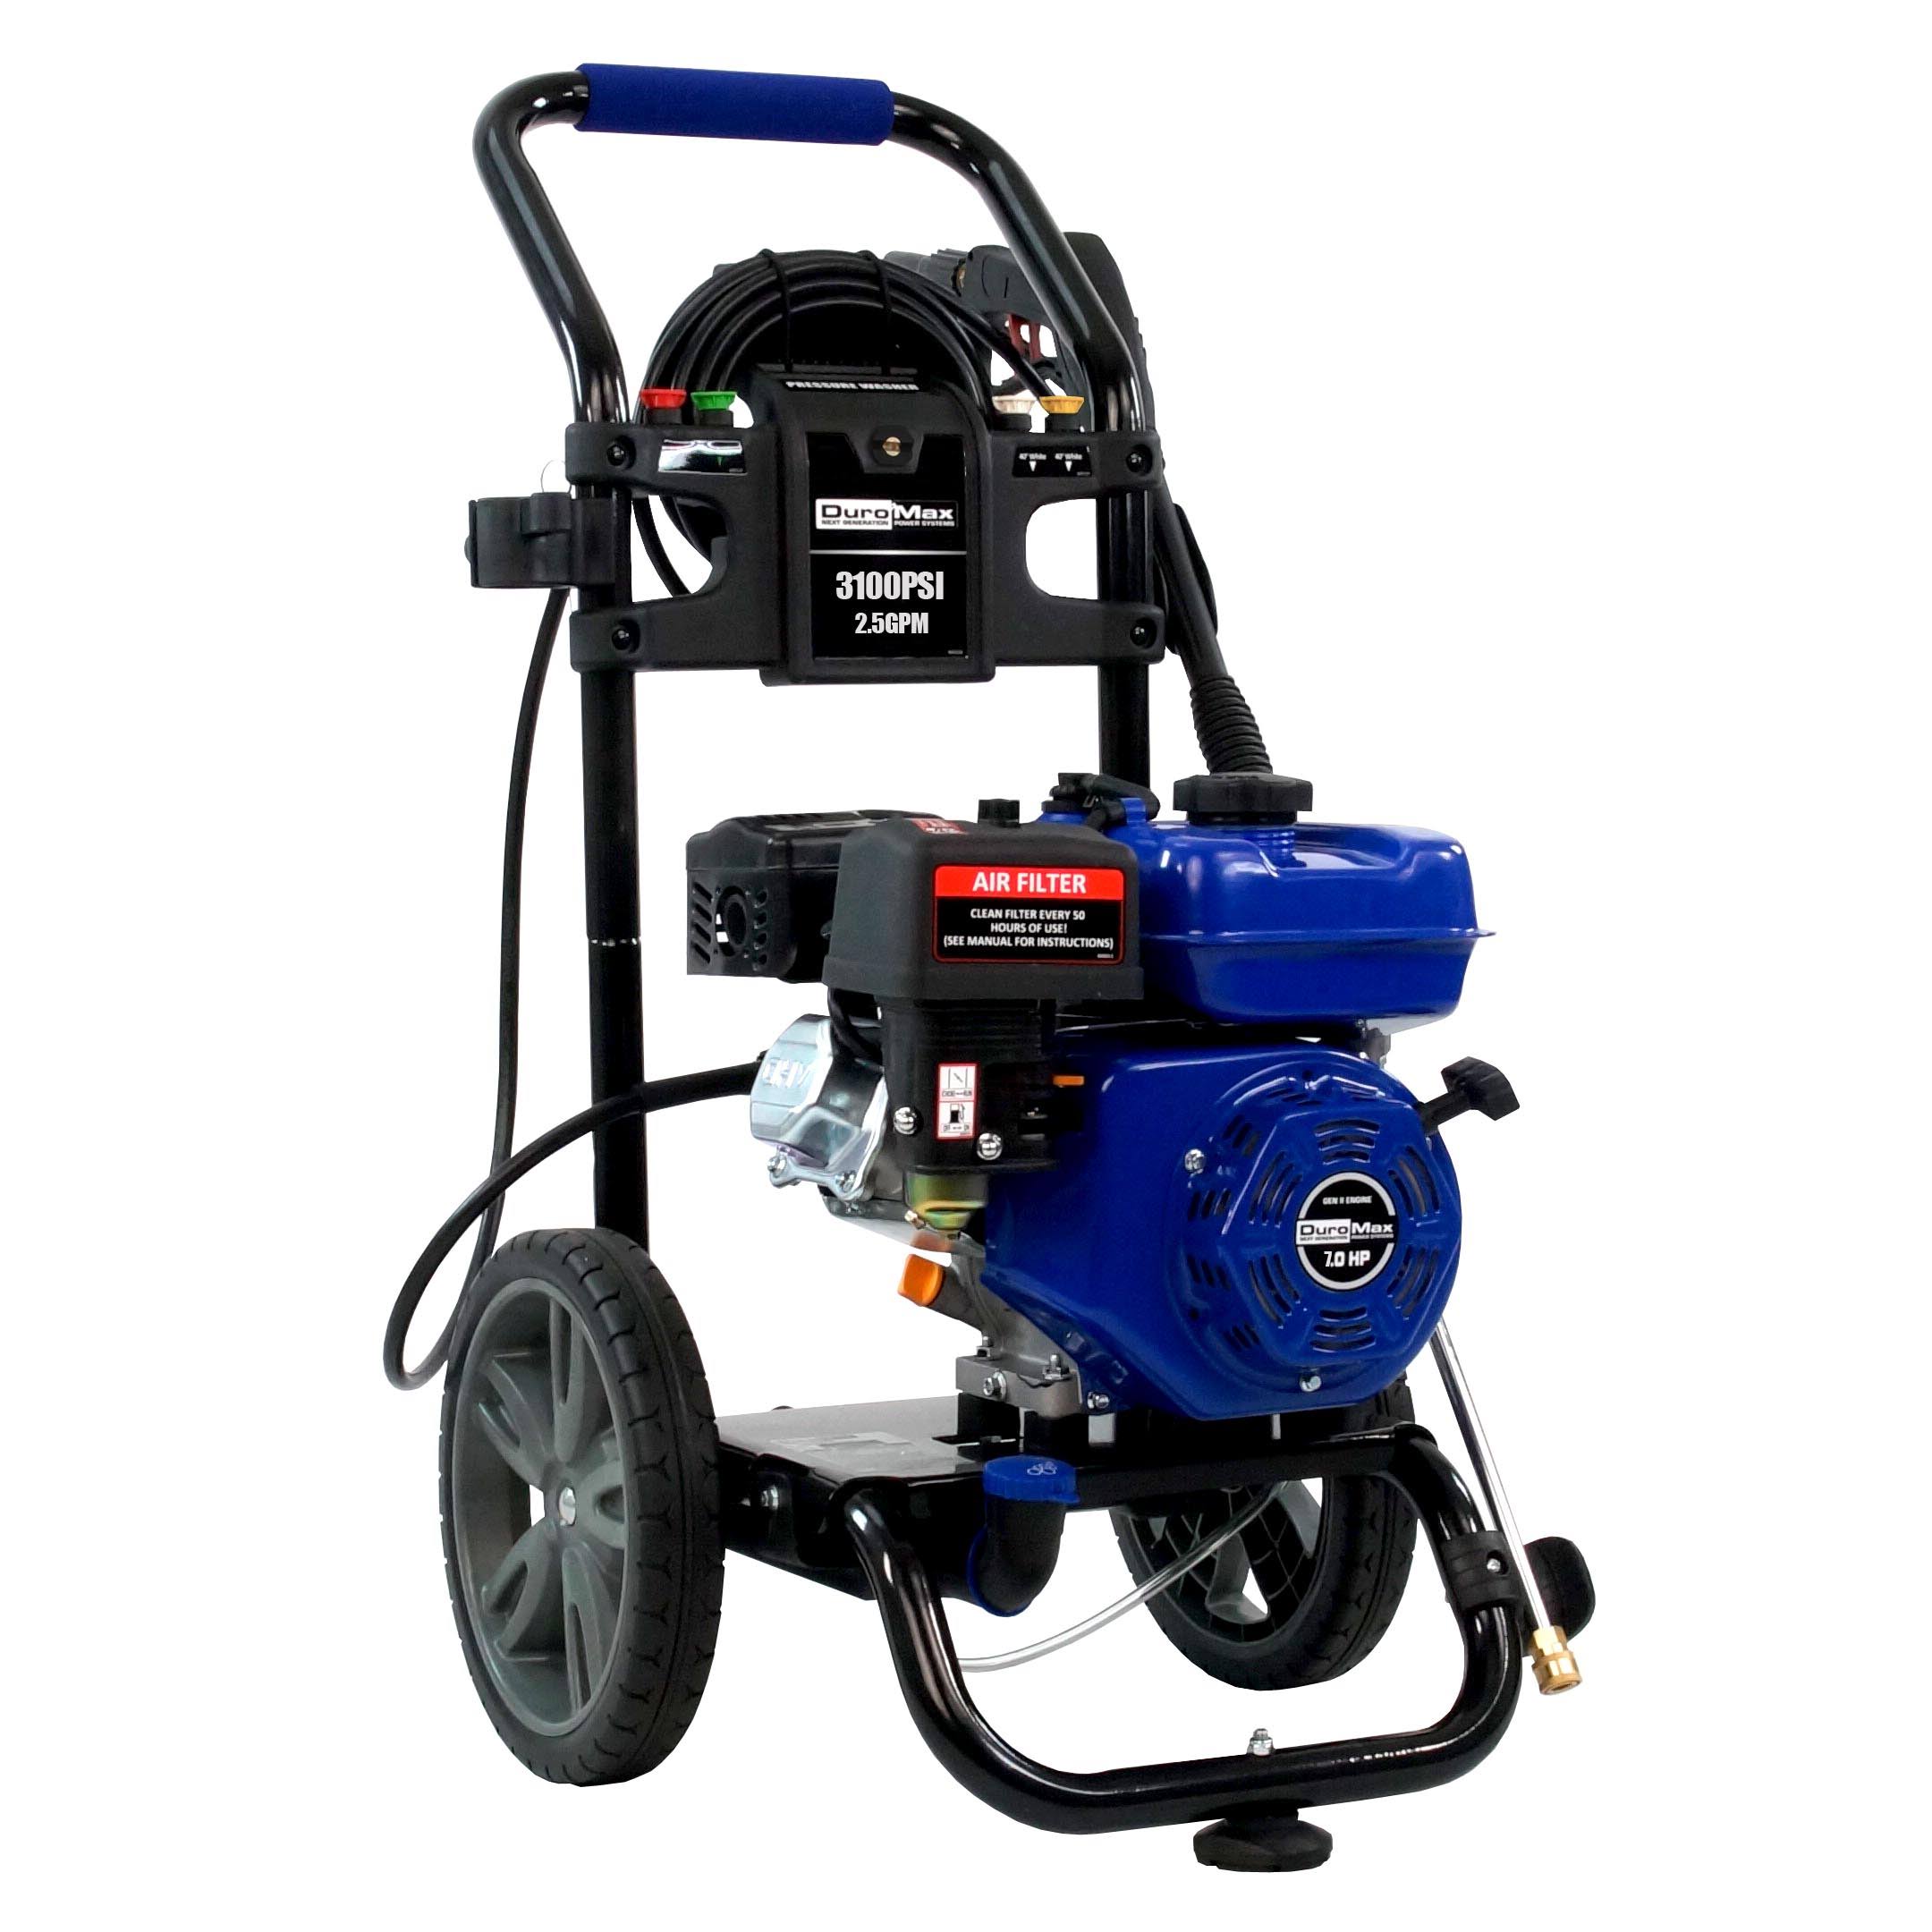 Power Max Duromax XP3100PWT 2.5 GPM Gas Powered Cold Water Power Pressure Washer, 3100 PSI